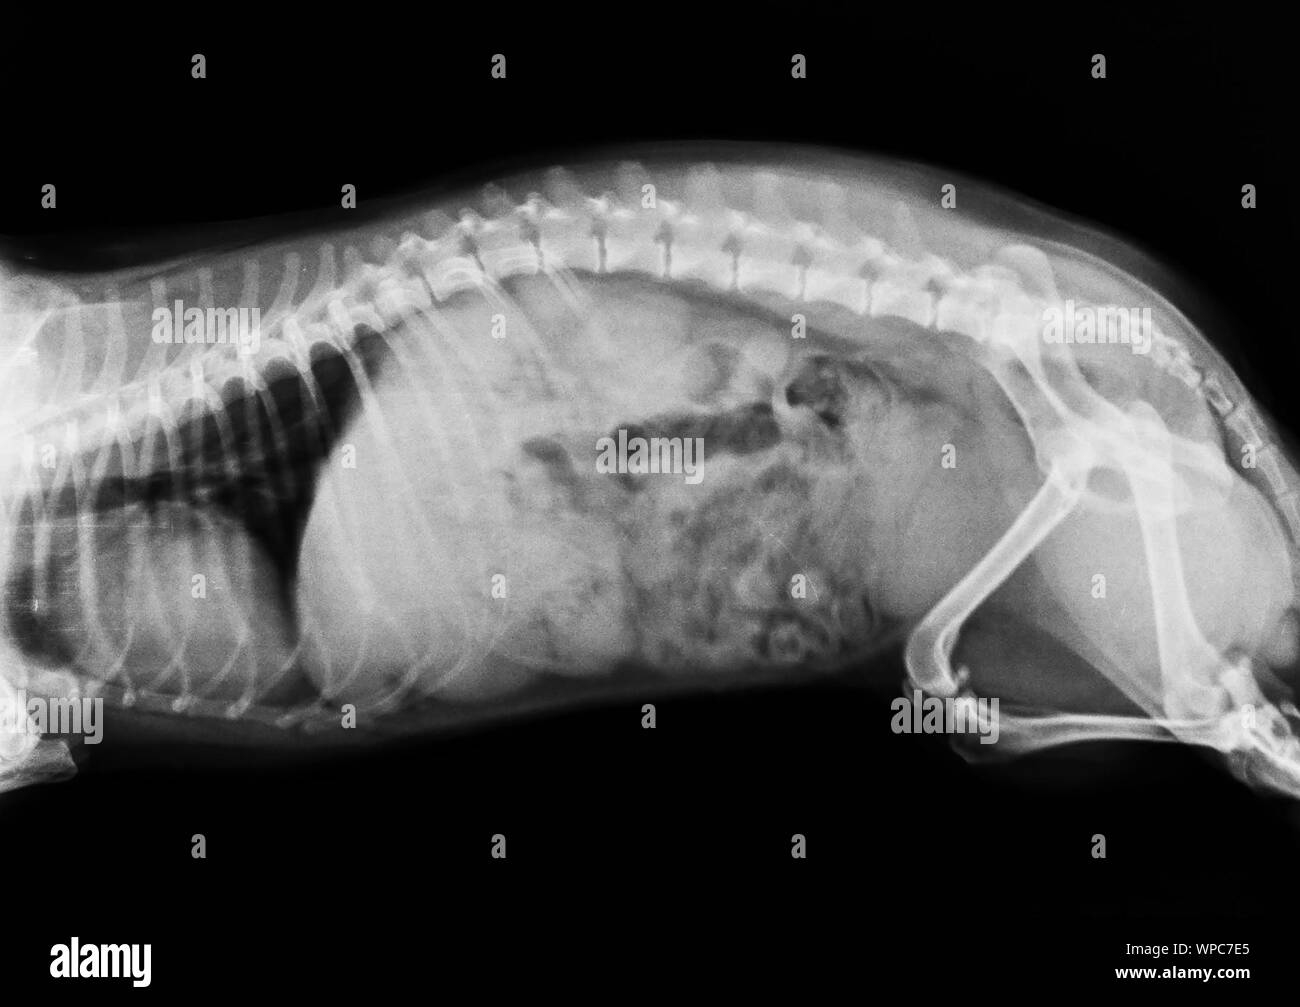 Veterinary Industry. Australian Silky Terrier Dog Spine X Ray Image. Side View. Pets Healthcare. Stock Photo